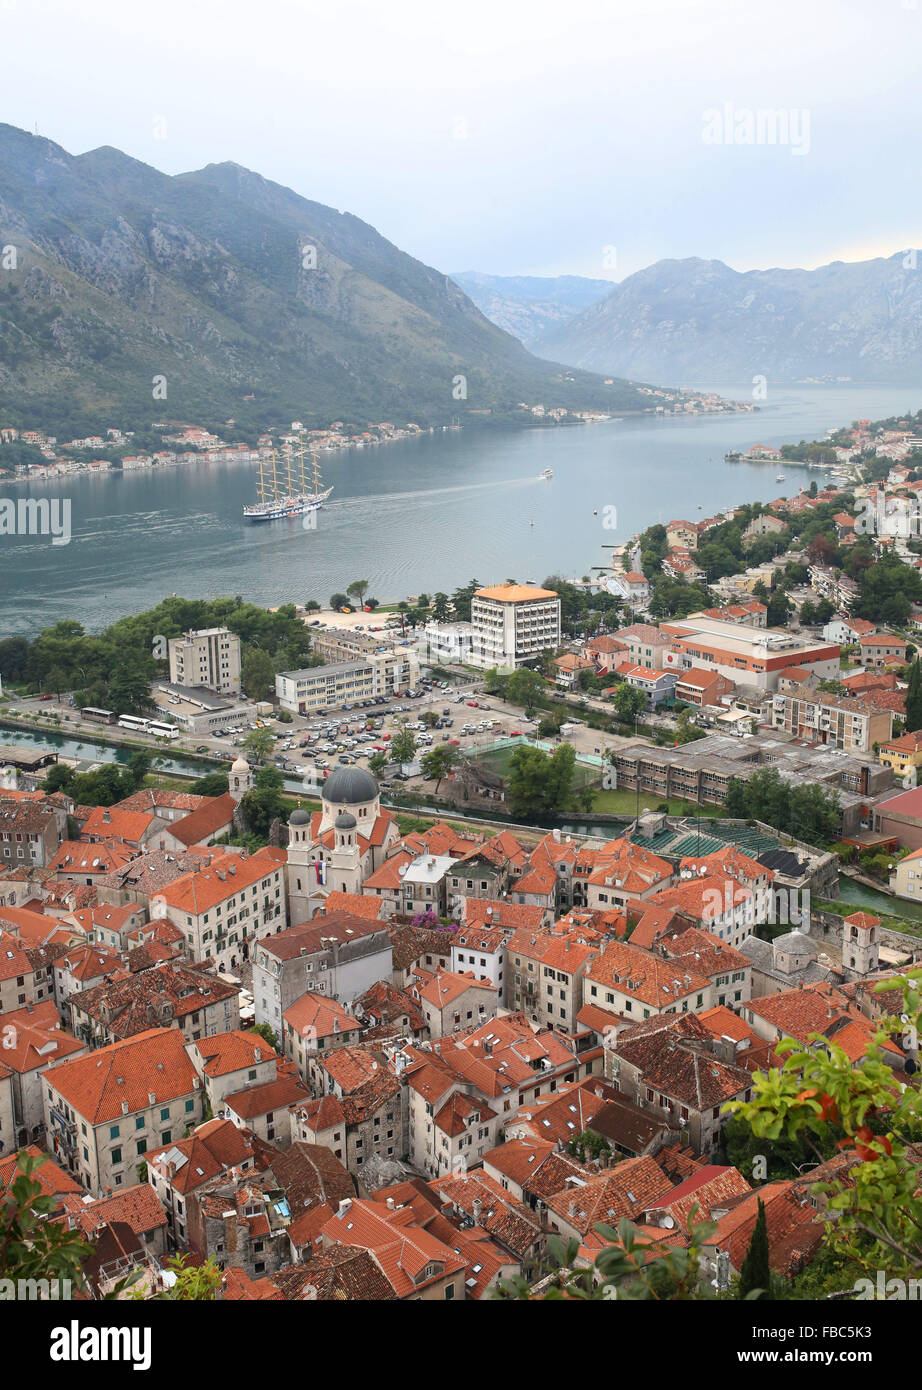 Tall ship pictured in the Bay of Kotor alongside medieval port town of Kotor, Montenegró. Stock Photo